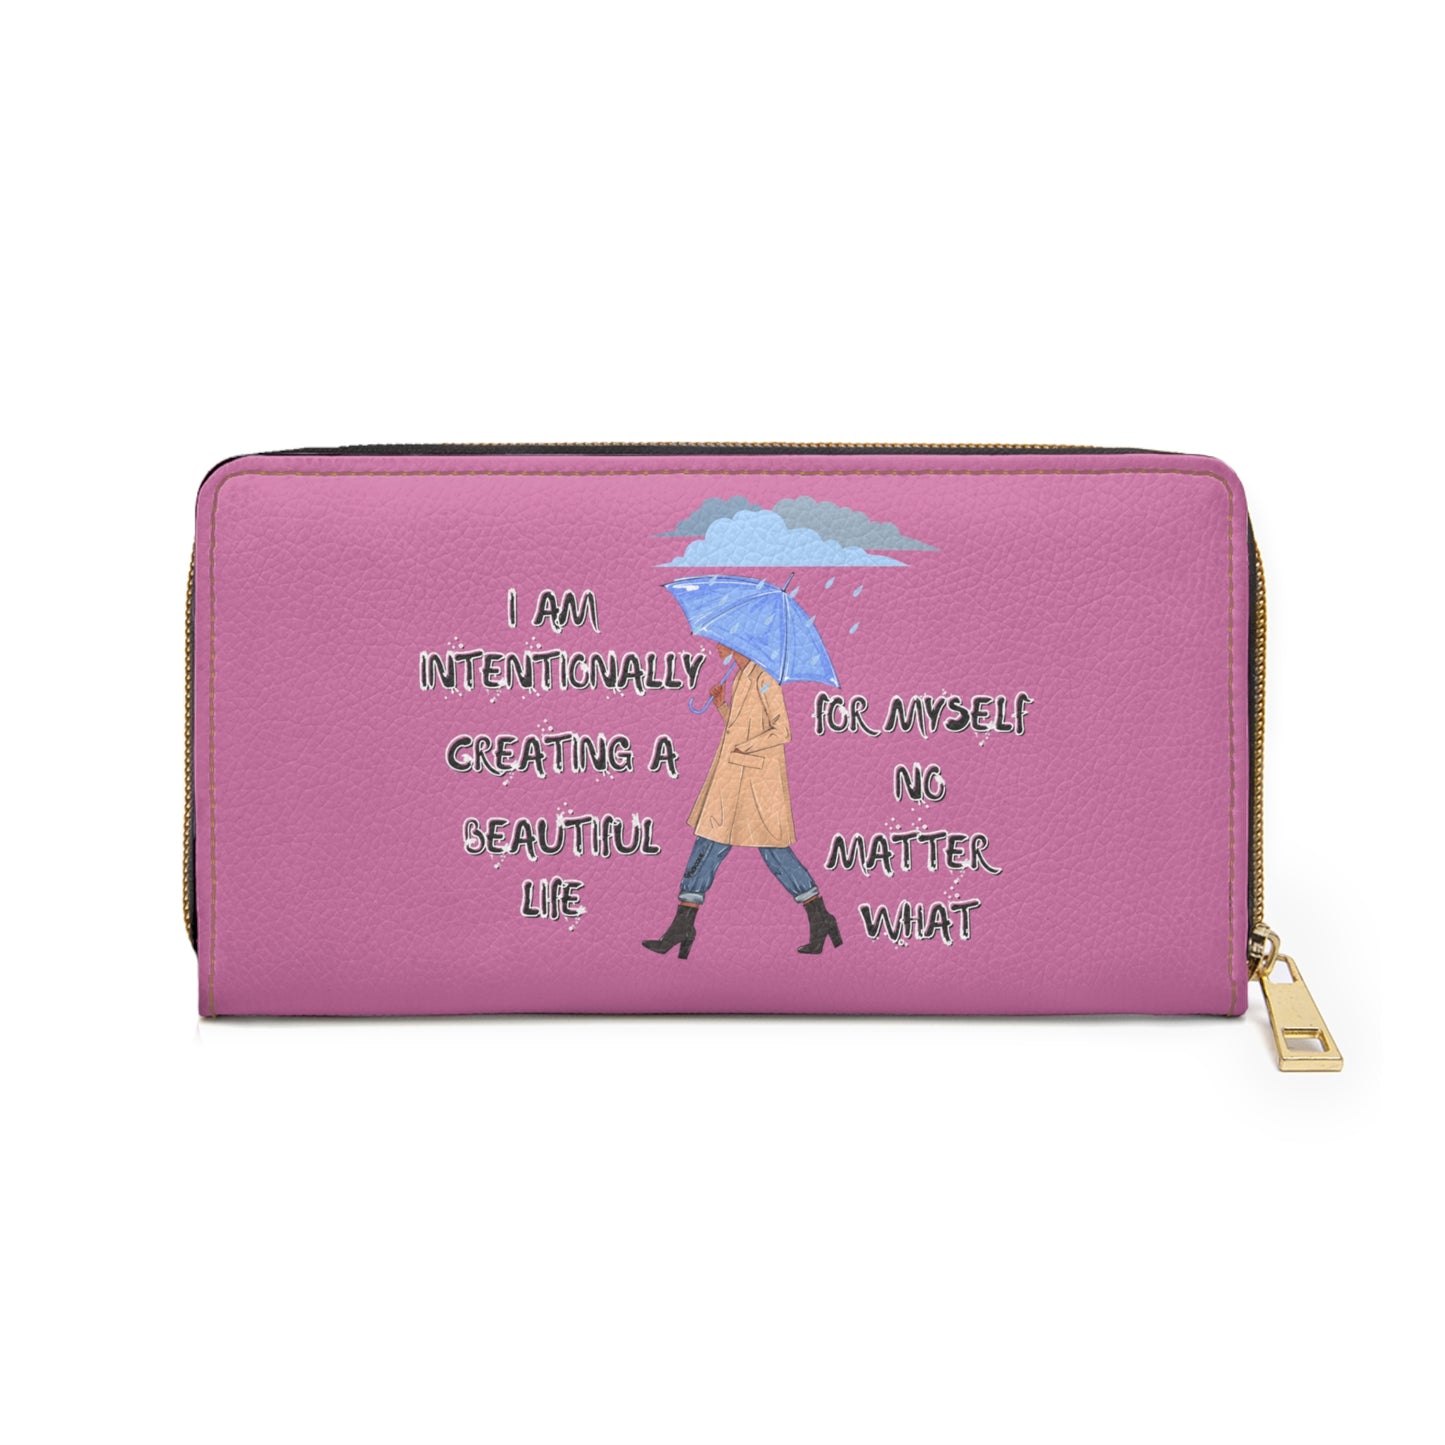 "I AM Intentionally Creating A Beautiful Life"- Positive Afrocentric Affirmation Vegan Leather Wallet Bag- Empower Your Style and Self-Love' ; Pink Wallet